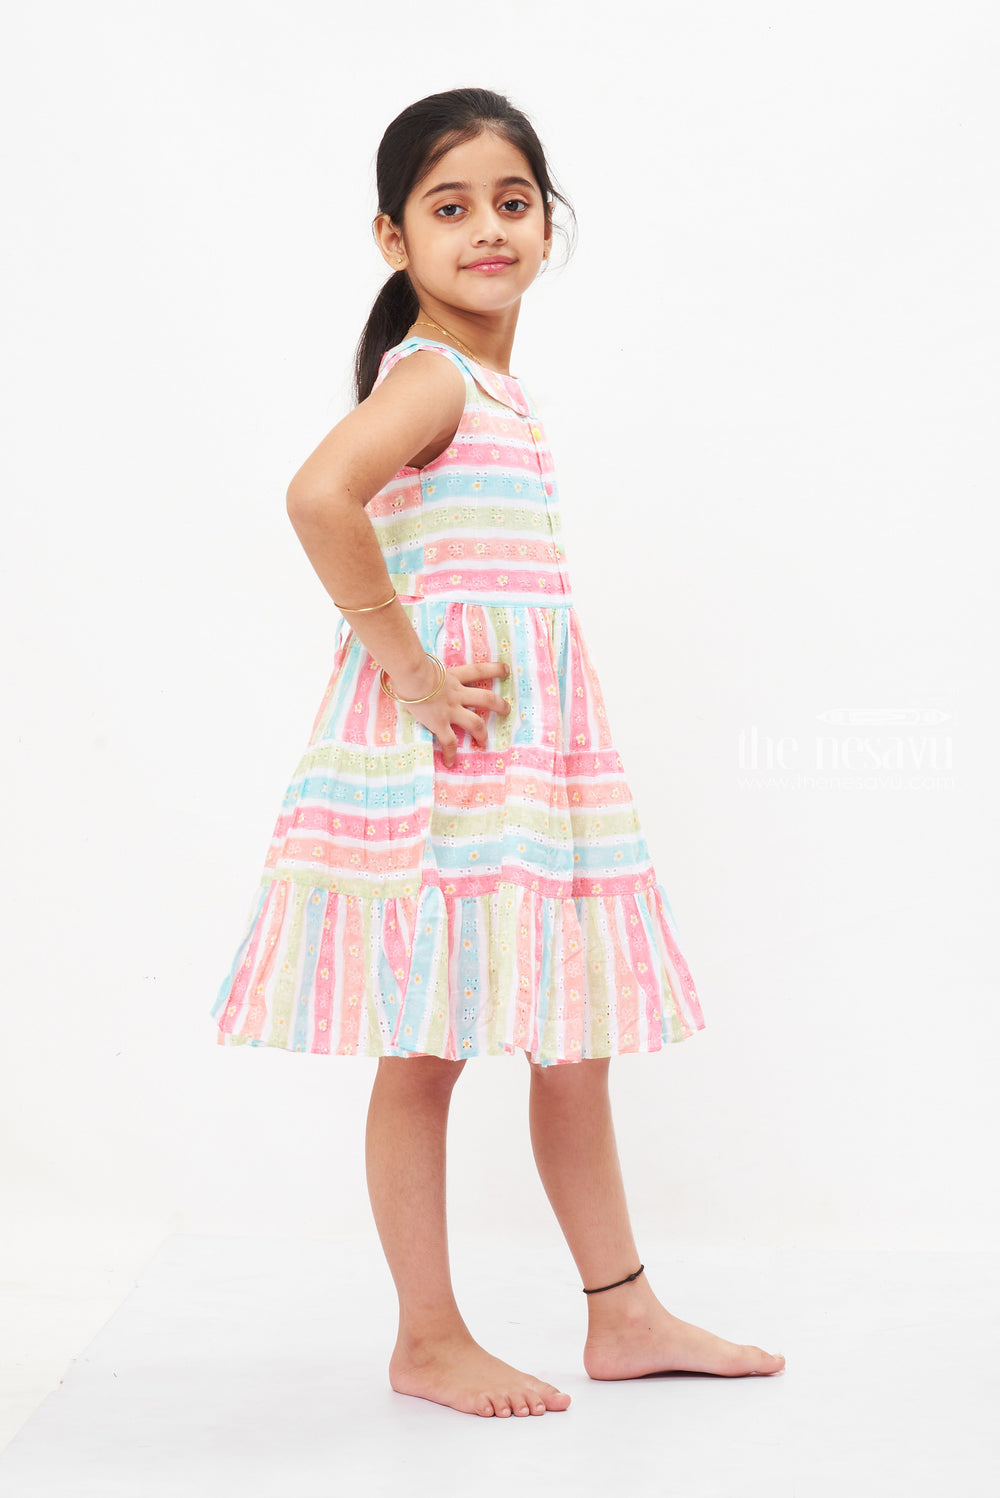 The Nesavu Girls Cotton Frock Rainbow Stripe Chikan Embroidered Cotton Frock for Girls - Vibrant and Versatile Nesavu Buy Embroidered Cotton Frock for Girls | Colorful Daily & Party Dress Online | The Nesavu